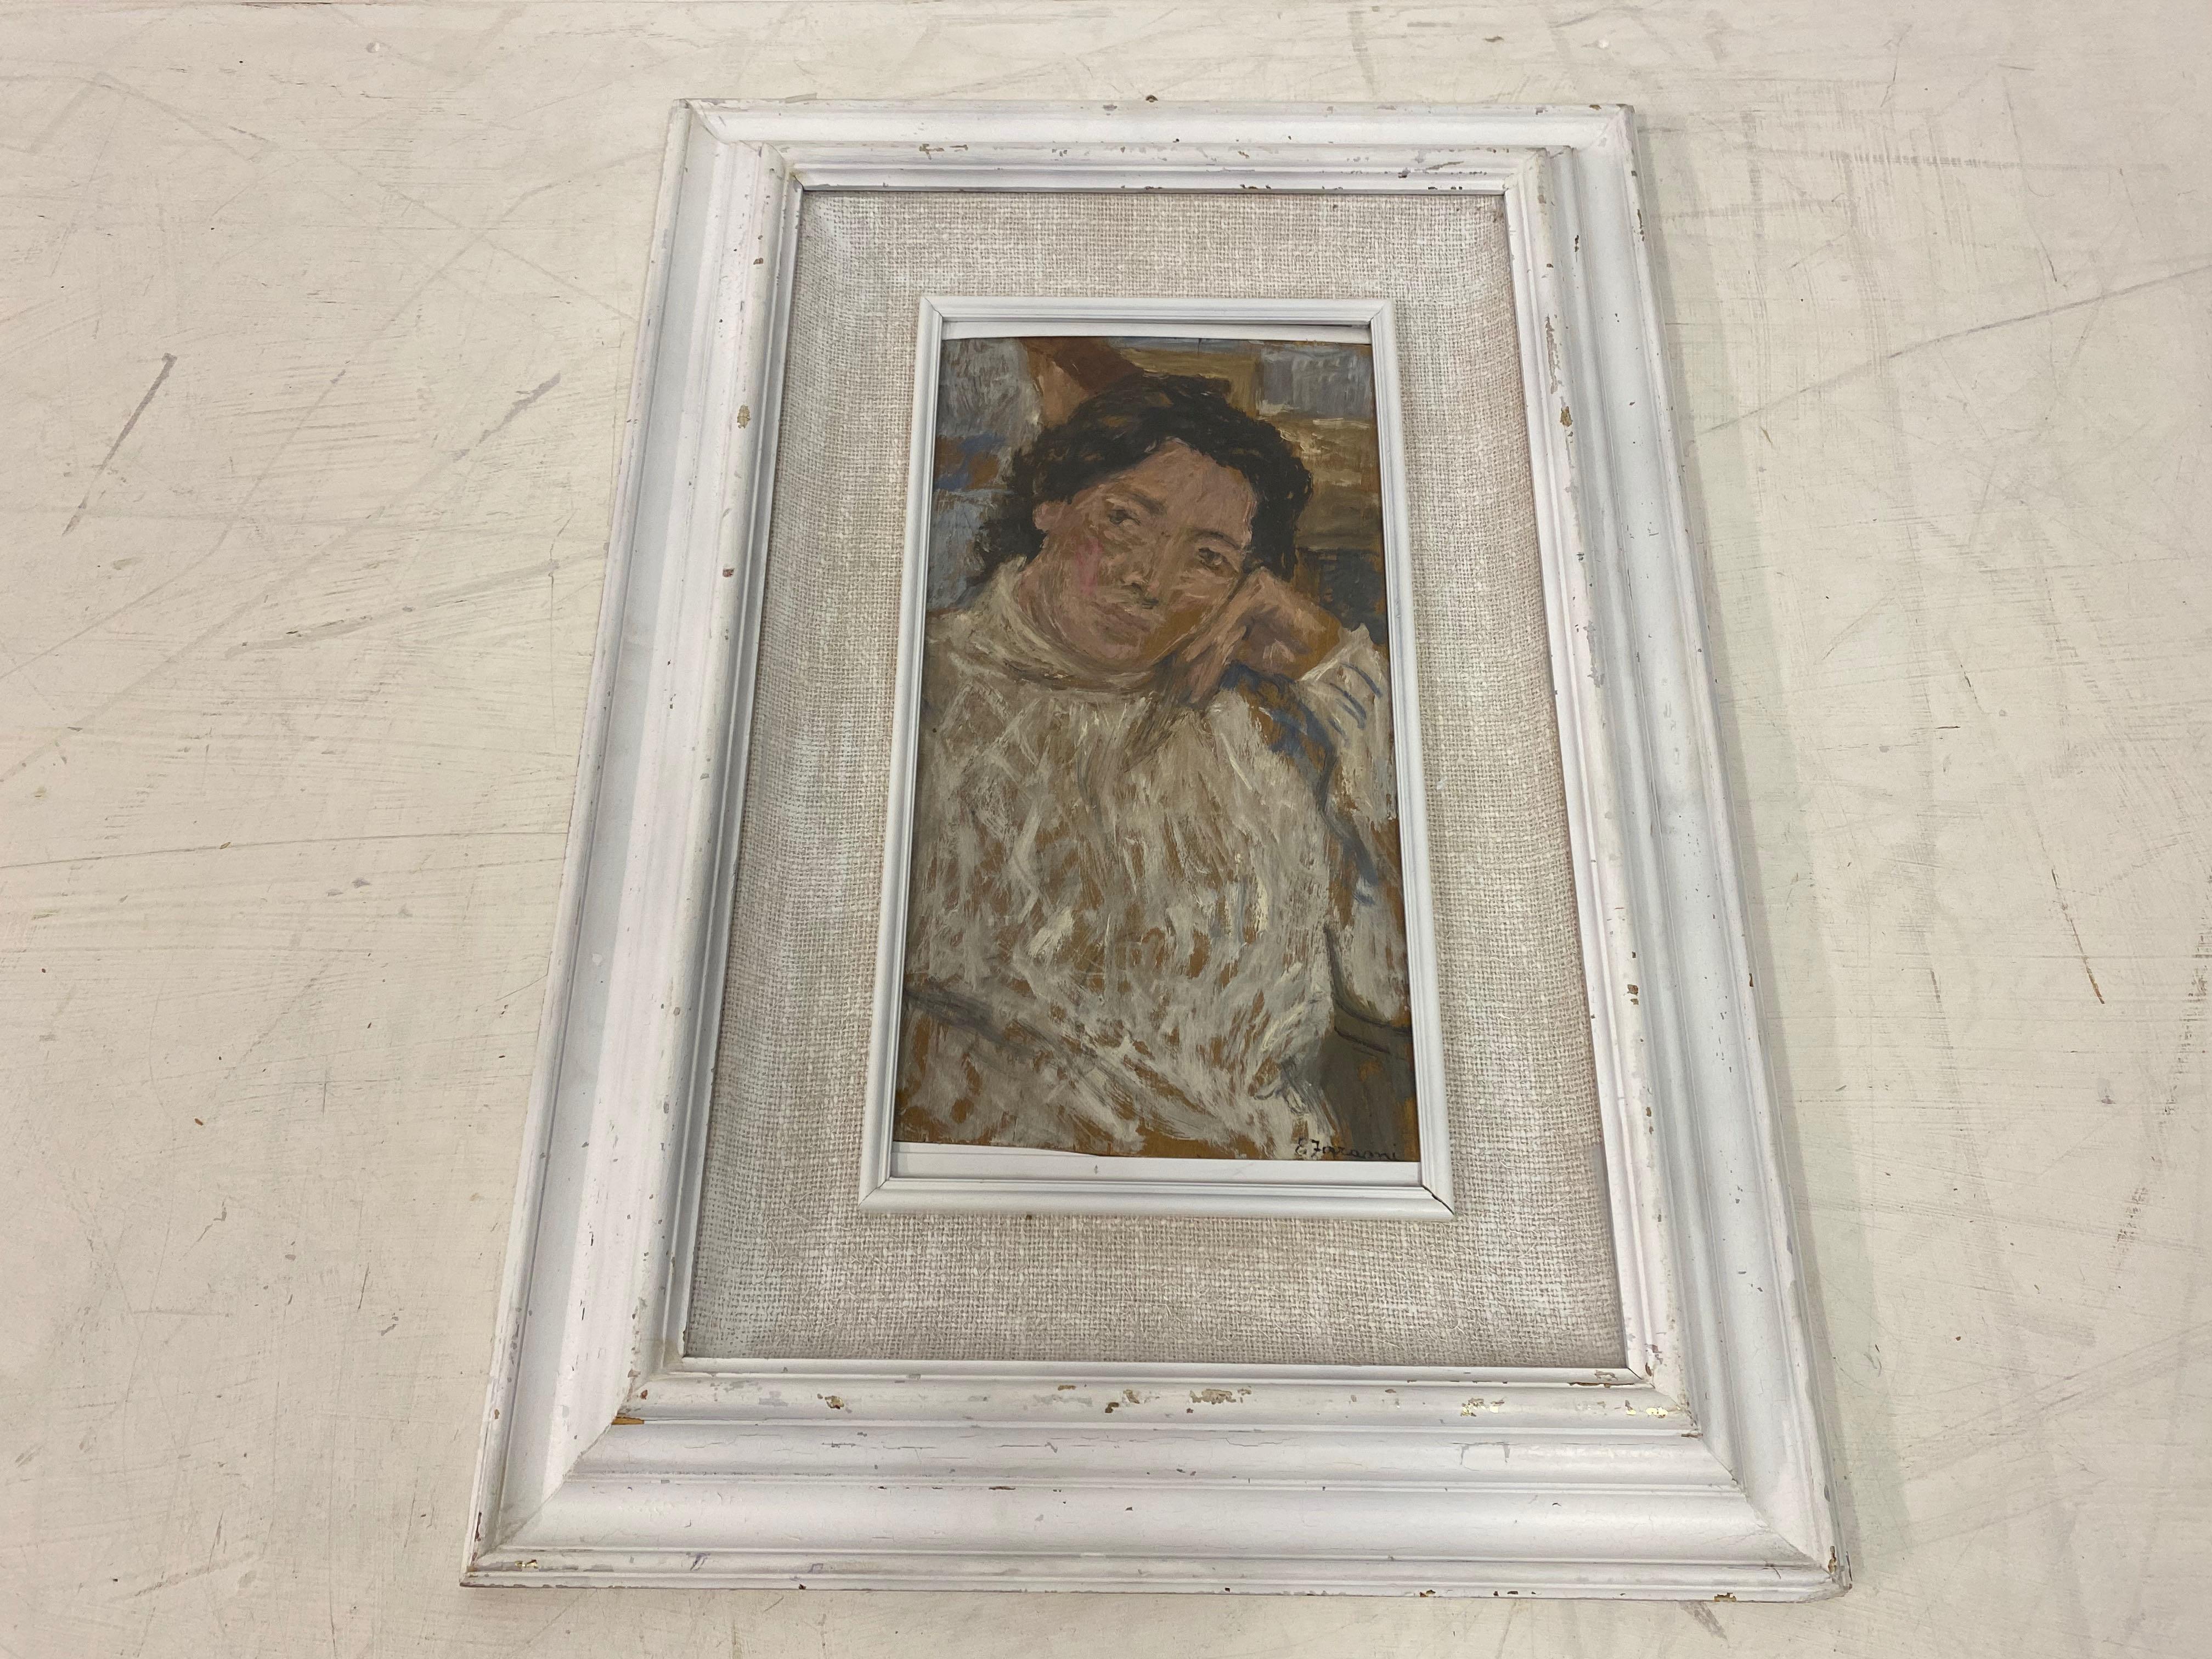 Portrait of a woman

Framed and glazed

Signed and dated on the reverse

1979 Italy.